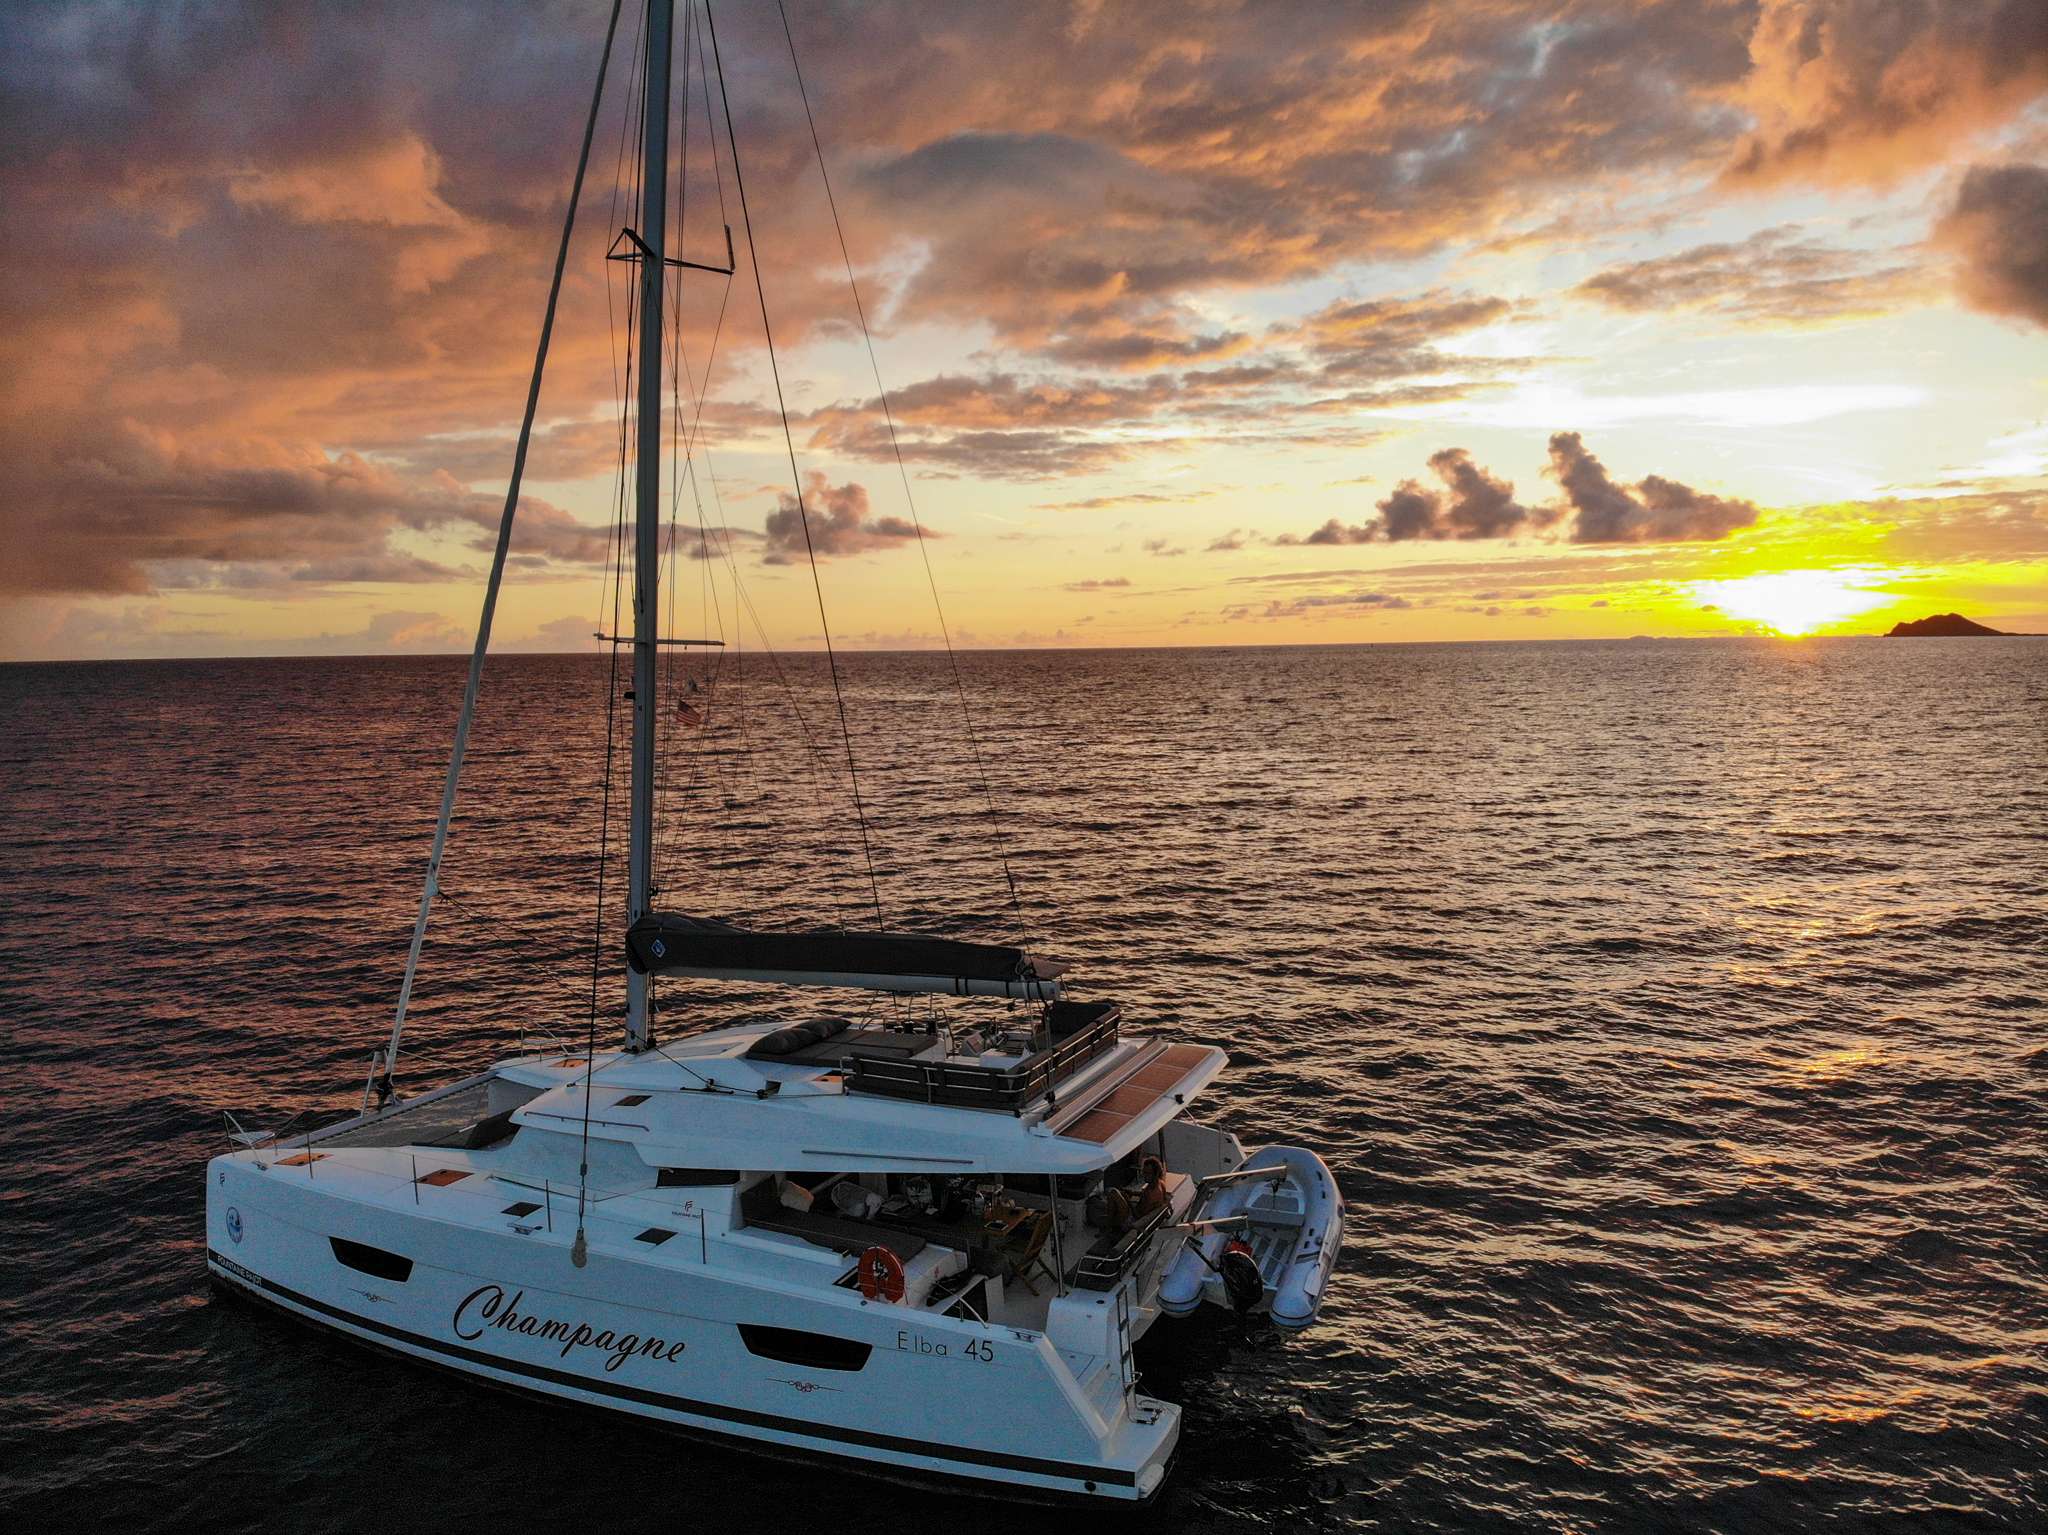 CHAMPAGNE Yacht Charter - Ritzy Charters